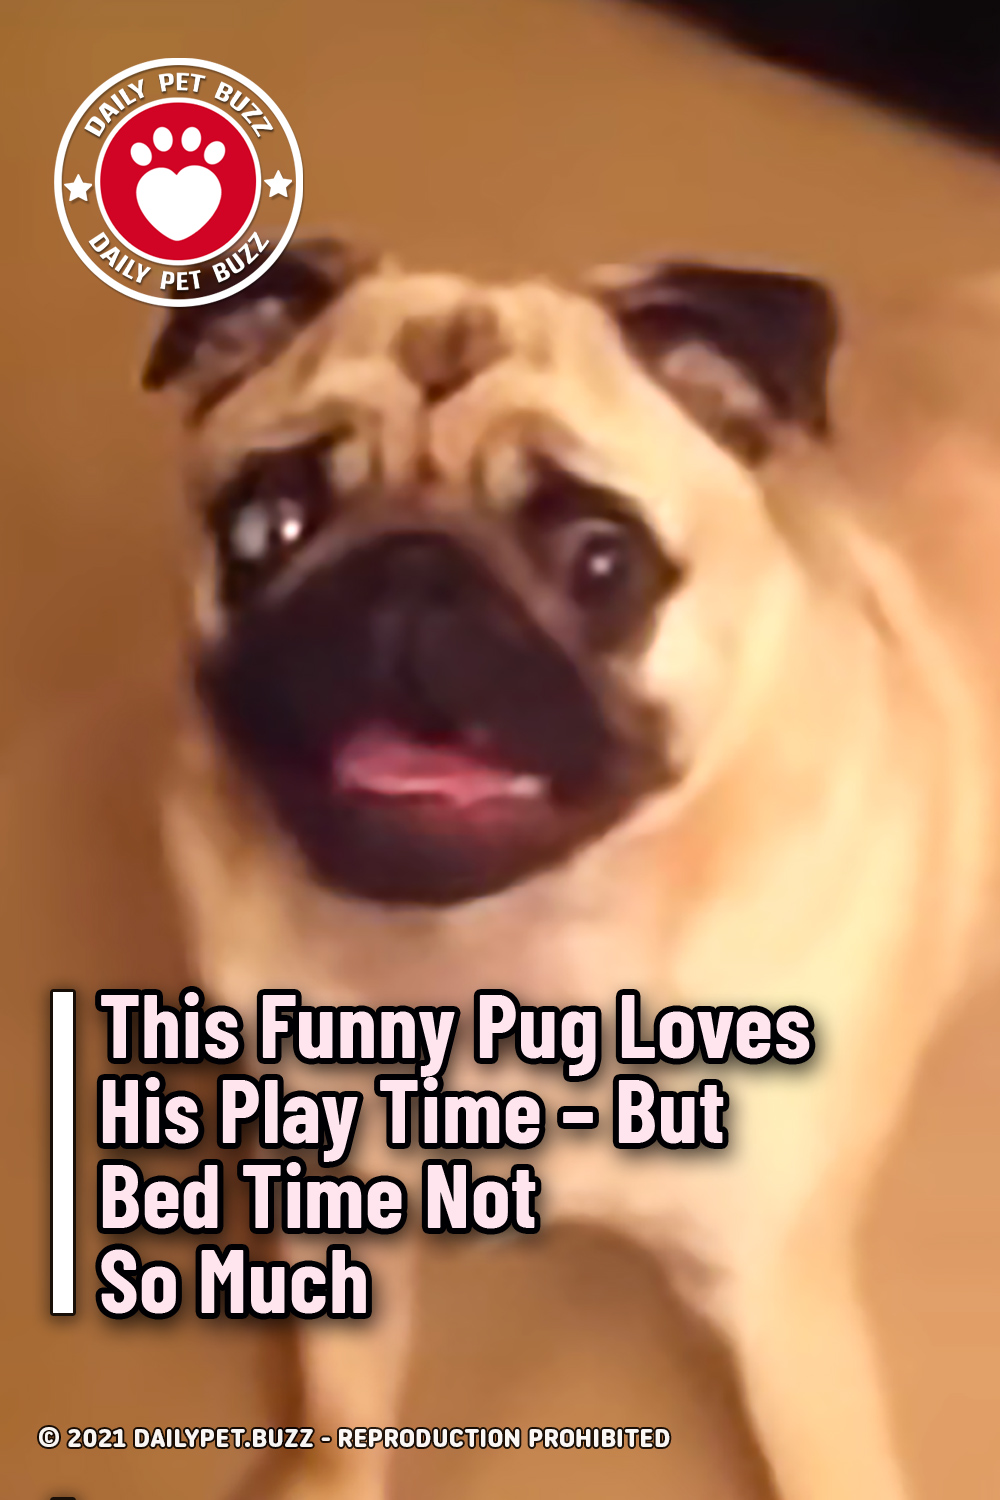 This Funny Pug Loves His Play Time – But Bed Time Not So Much